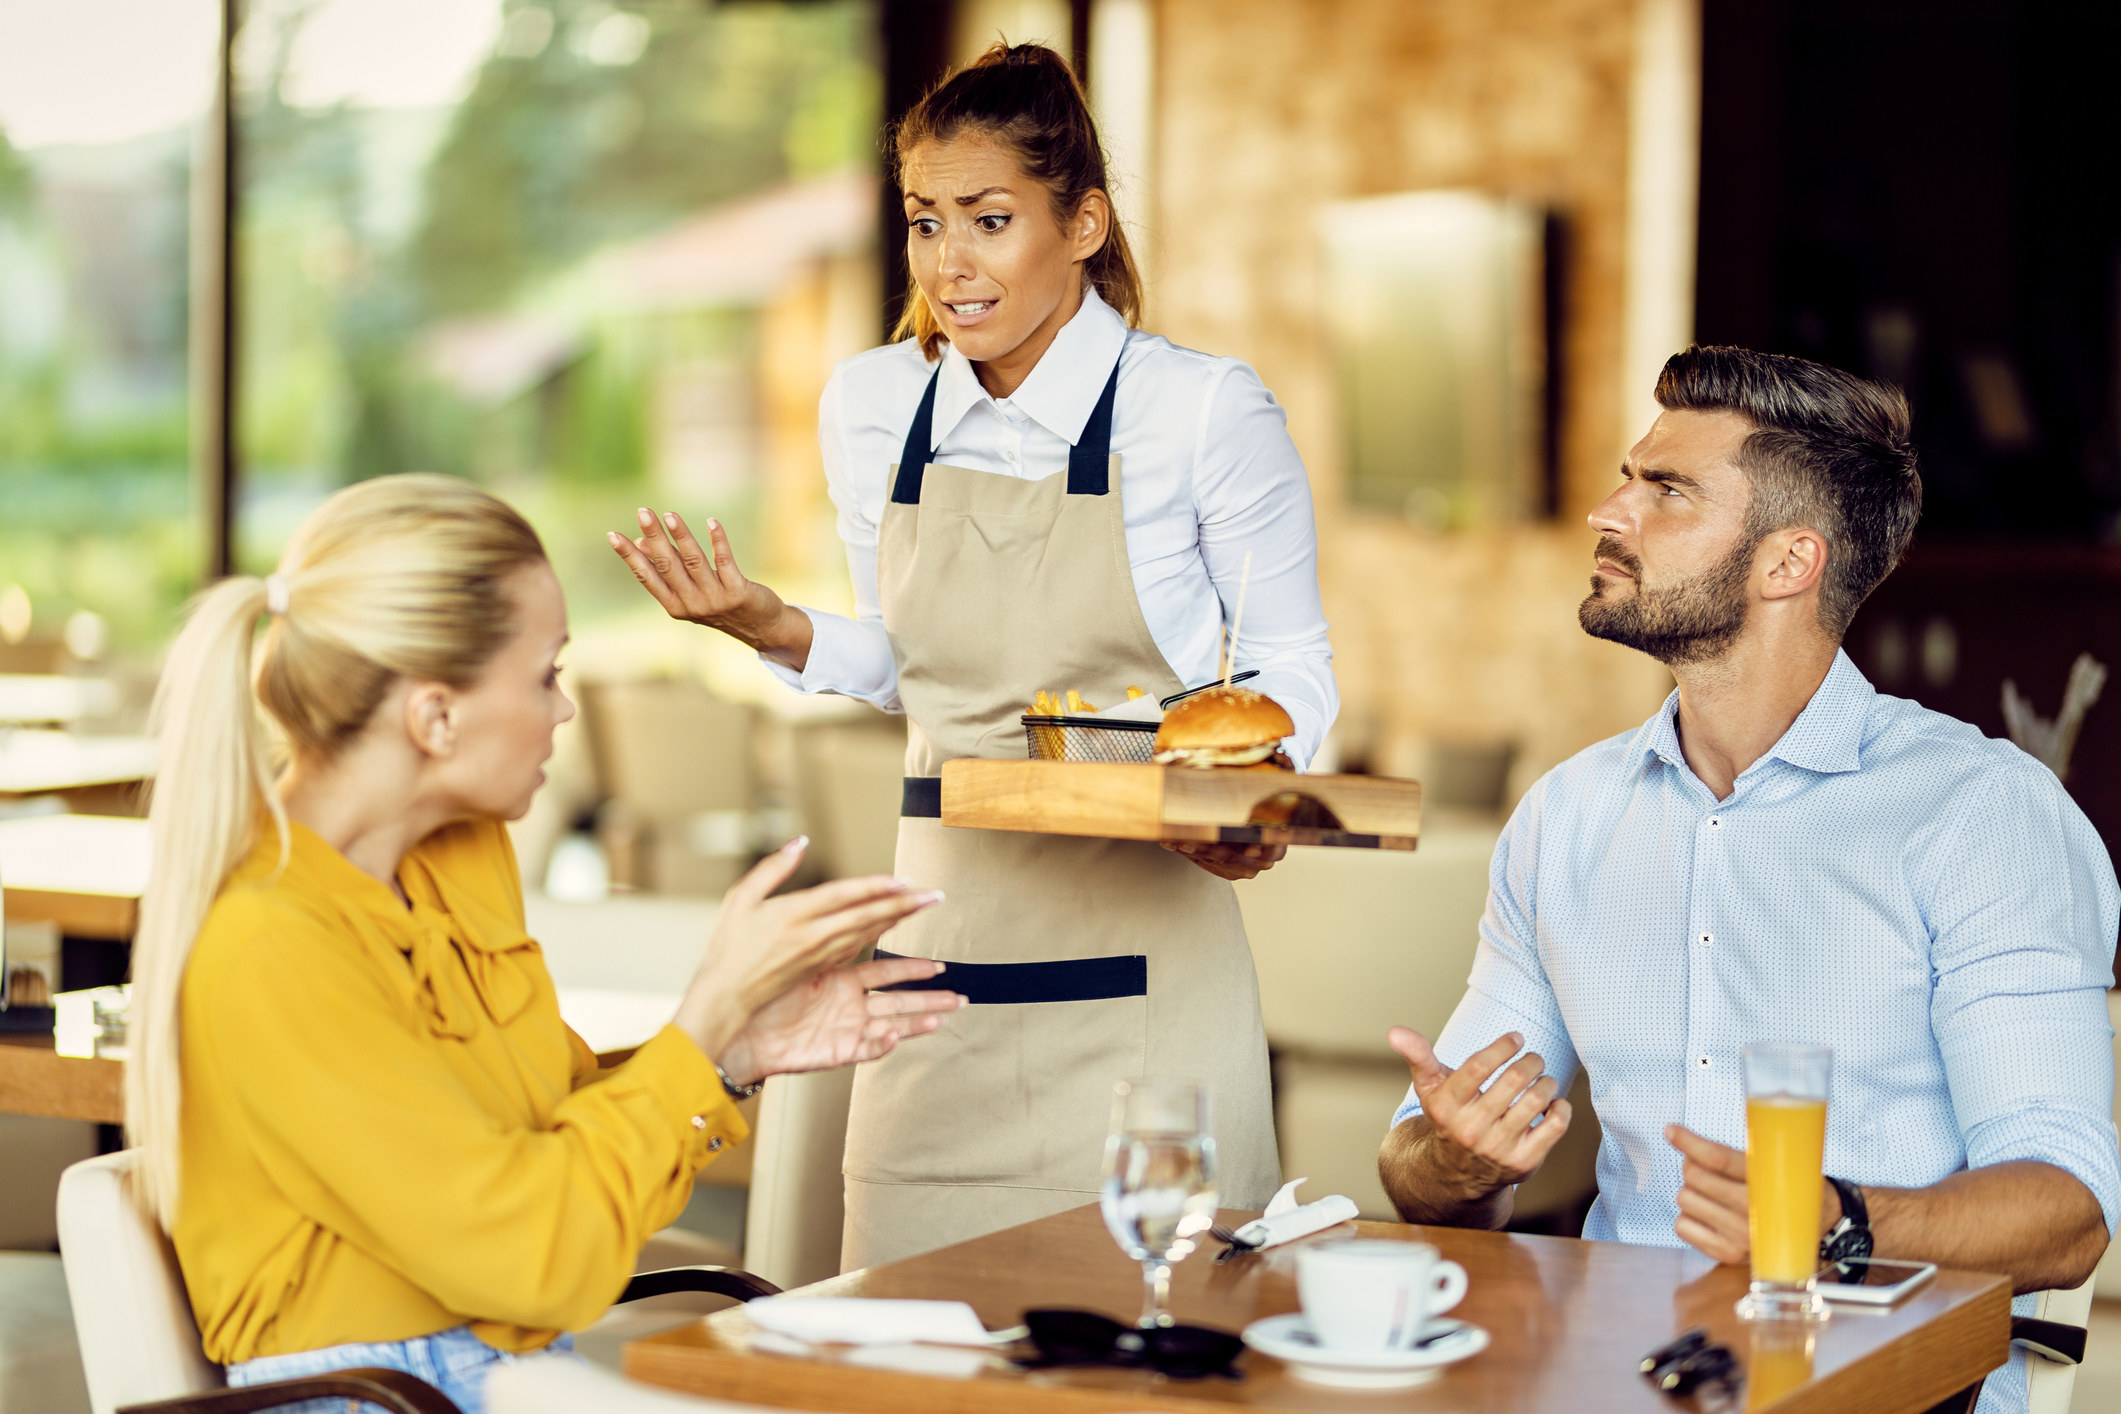 couple aggressively speaking to a server who looks sorry